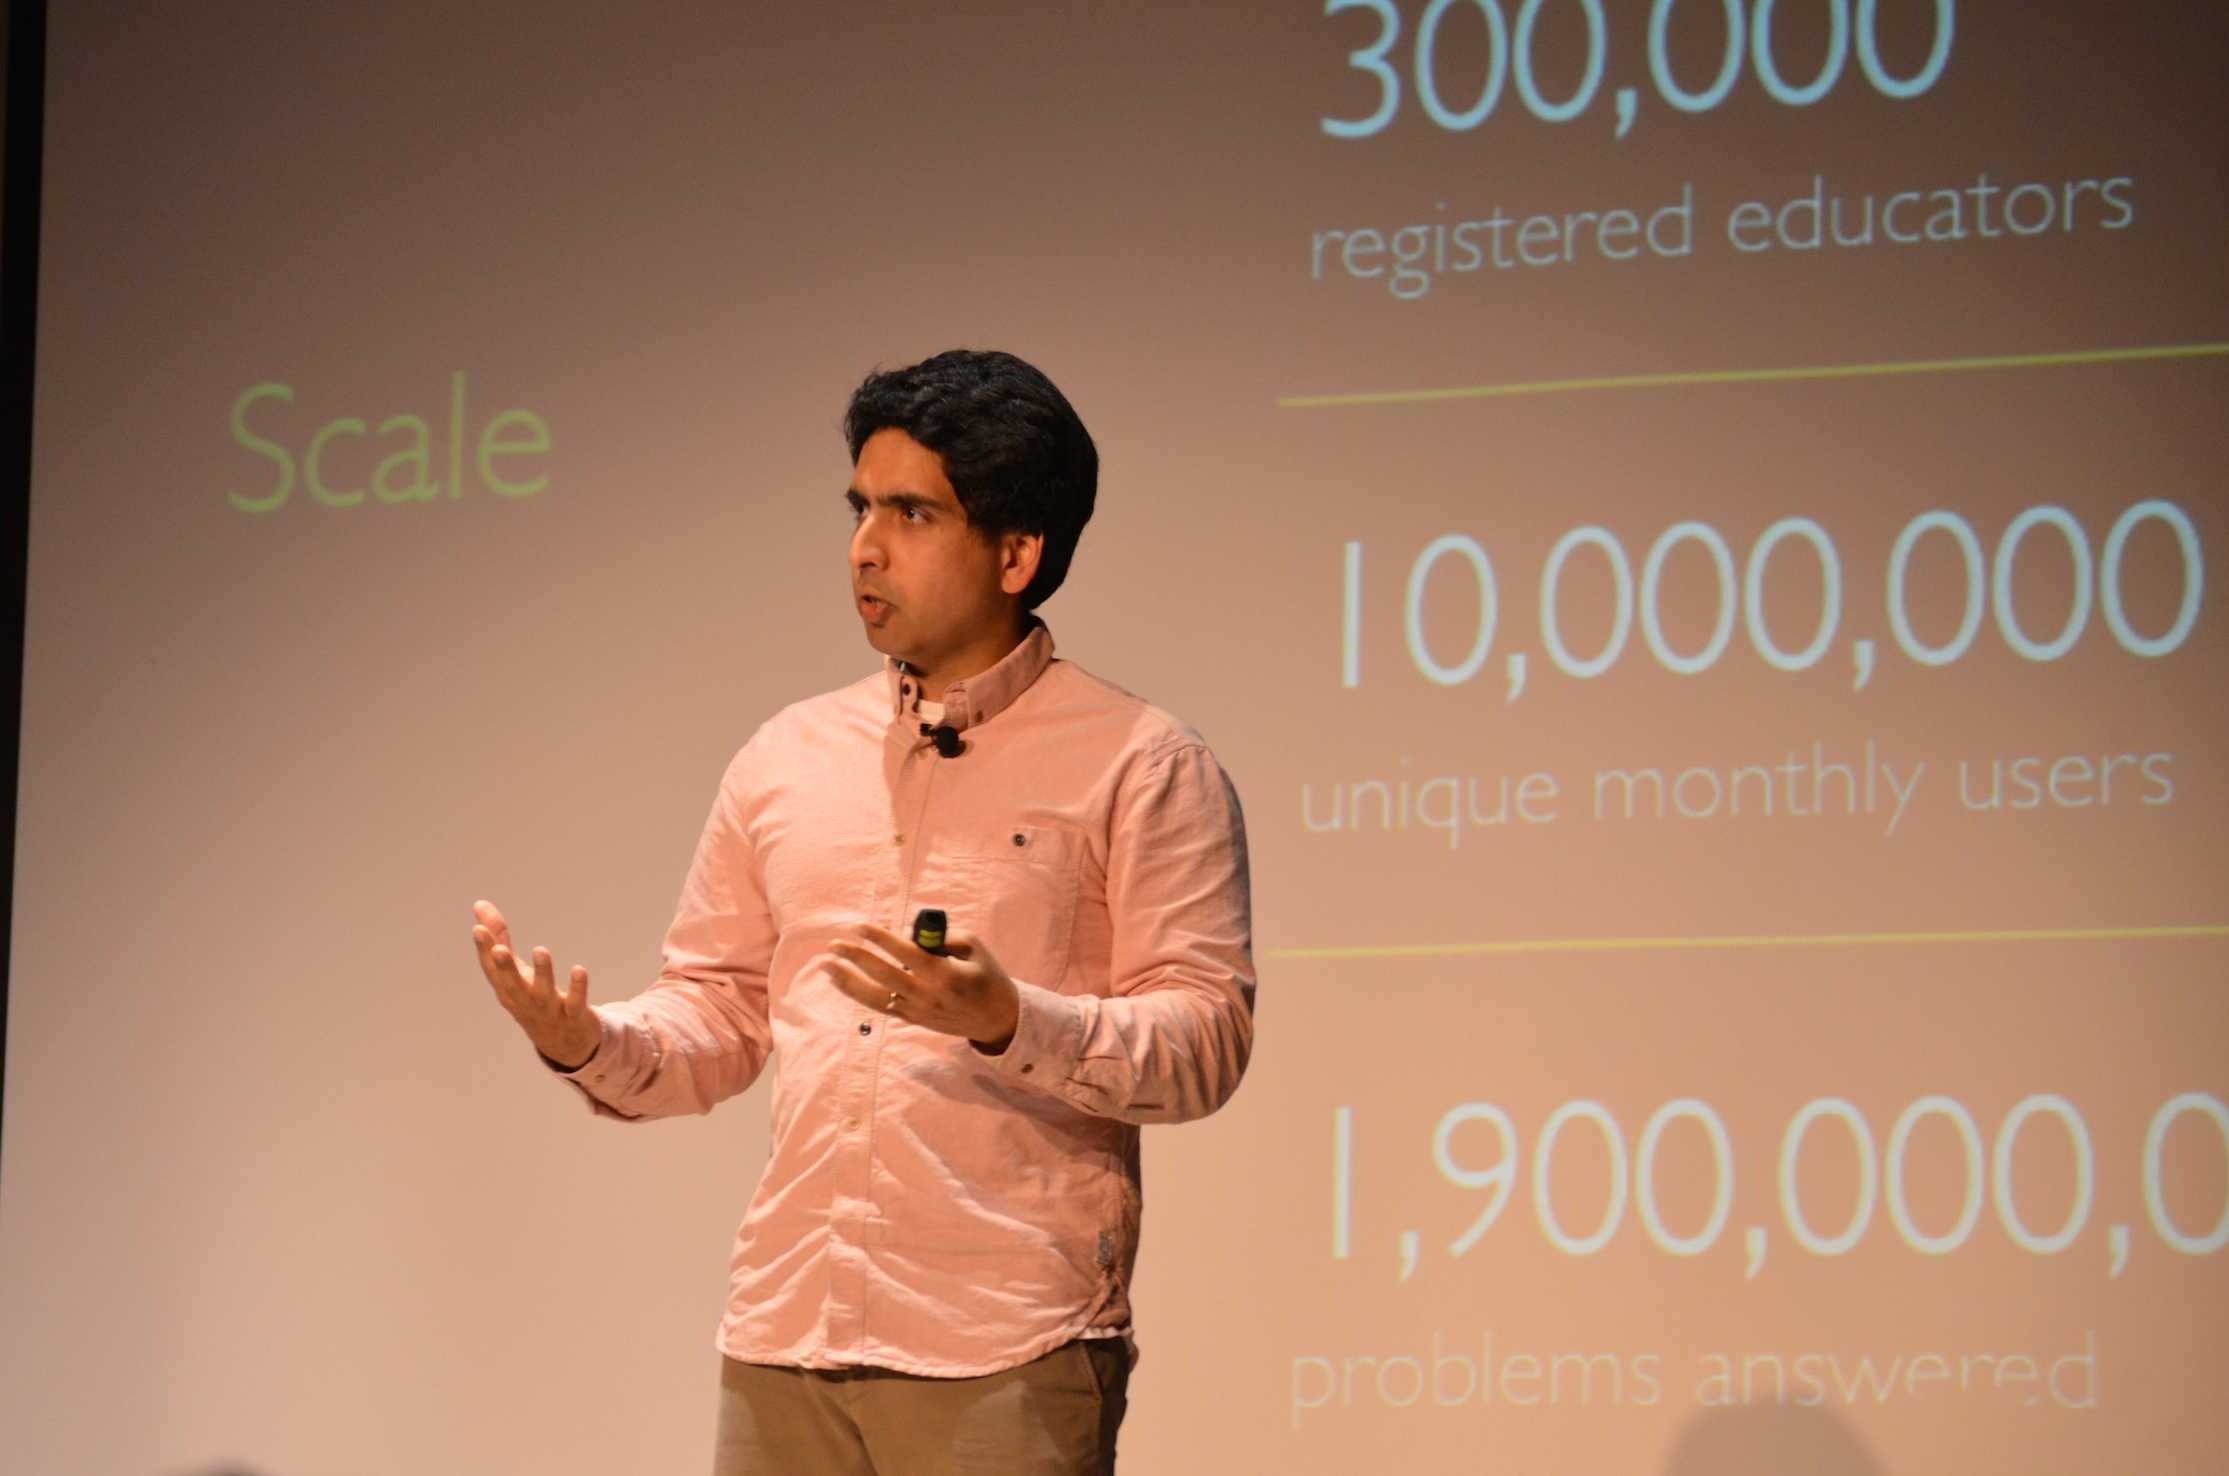 Khan do it: Salman Khan’s, founder of Khan Academy, speech was one of the highlights of the Symposium. He advocated for the education of students and described the scope of Khan Academy’s affect on people worldwide. 